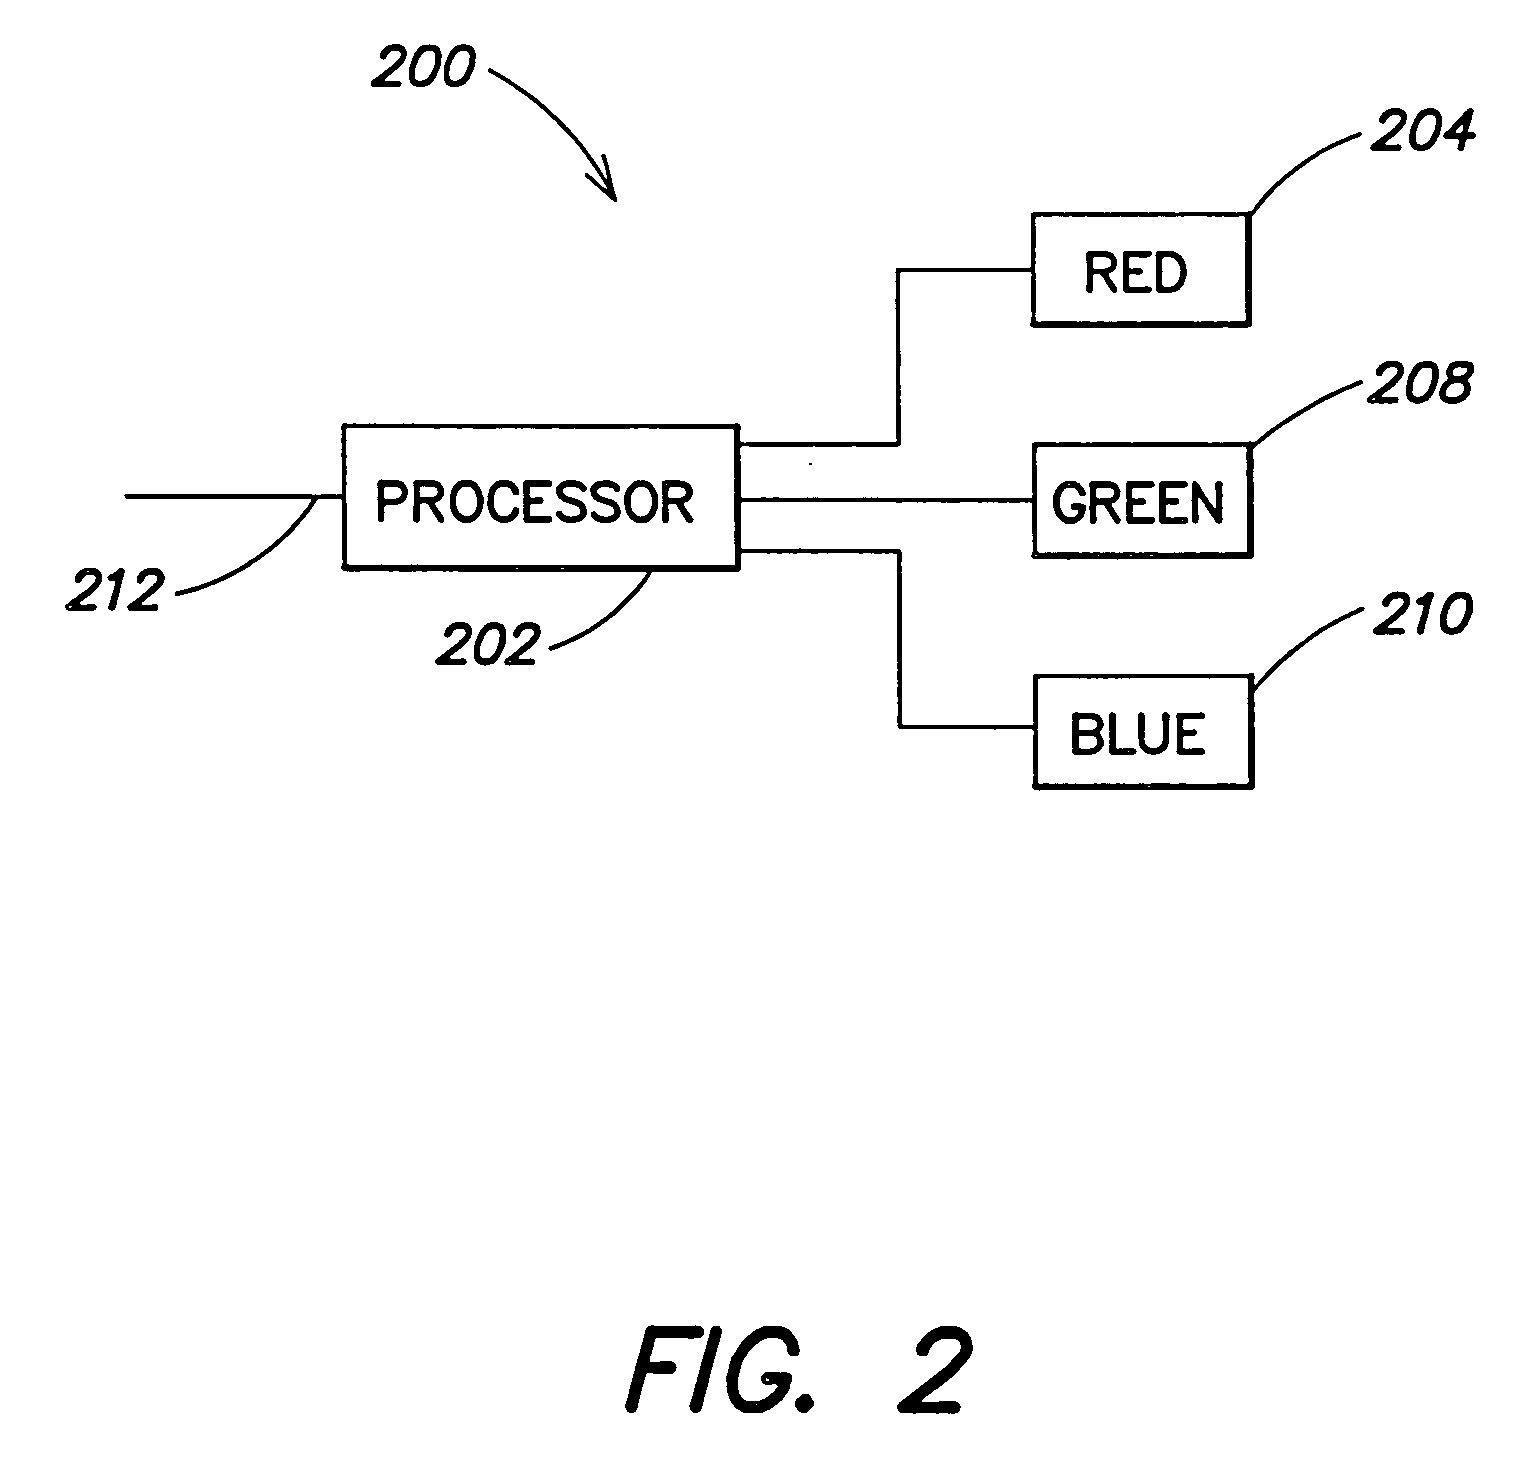 Systems and methods for providing illumination in machine vision systems